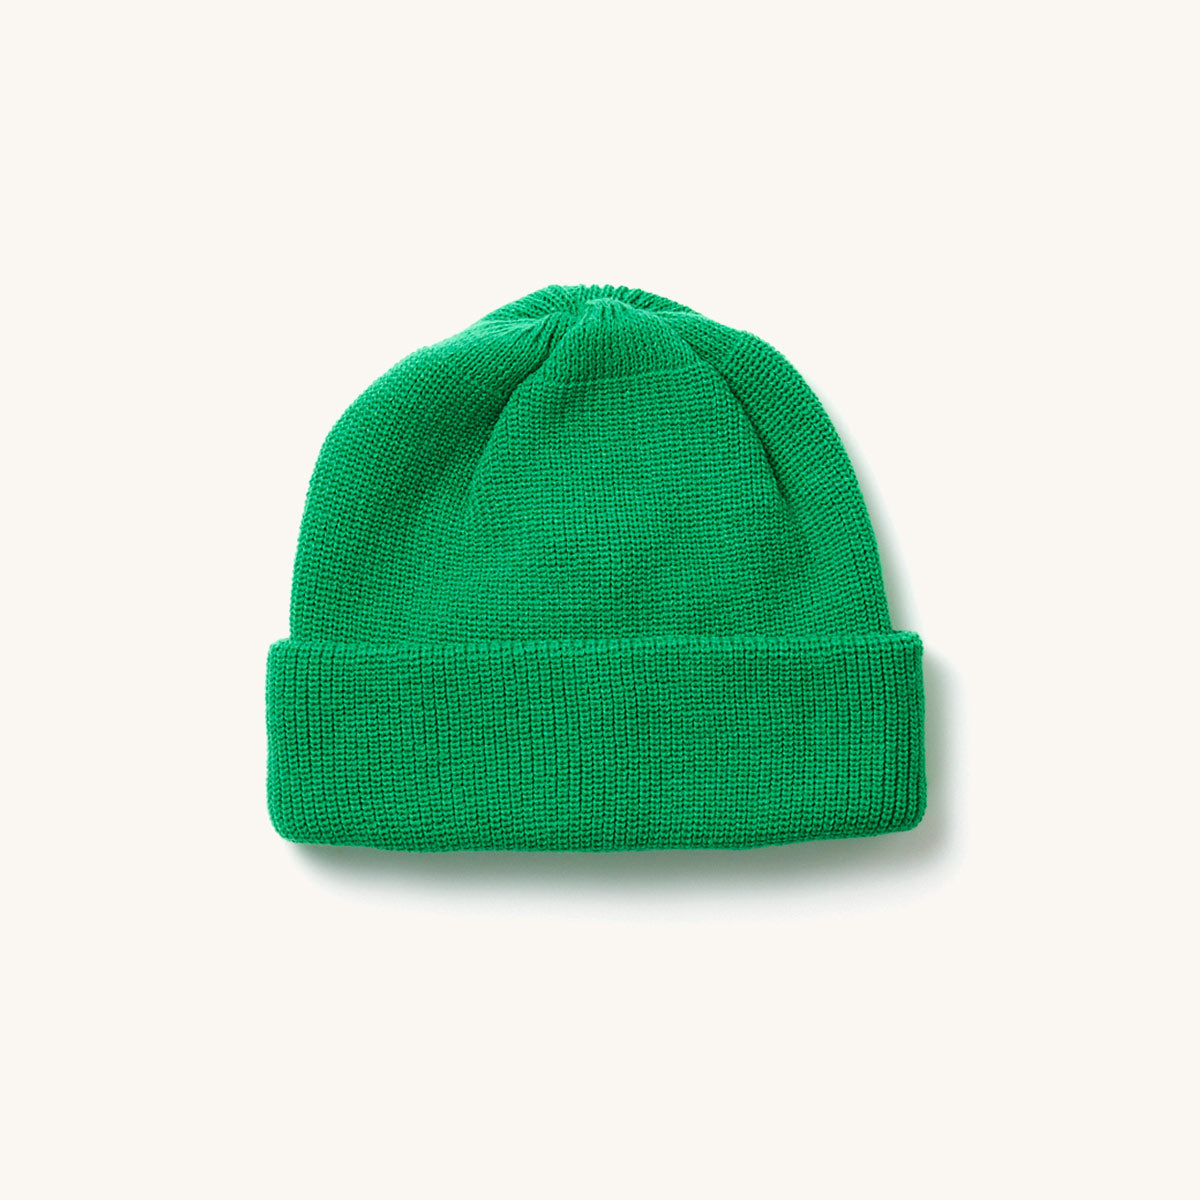 RoToTo Bulky Watch Cap - Green | Made in Japan | Tanner Goods